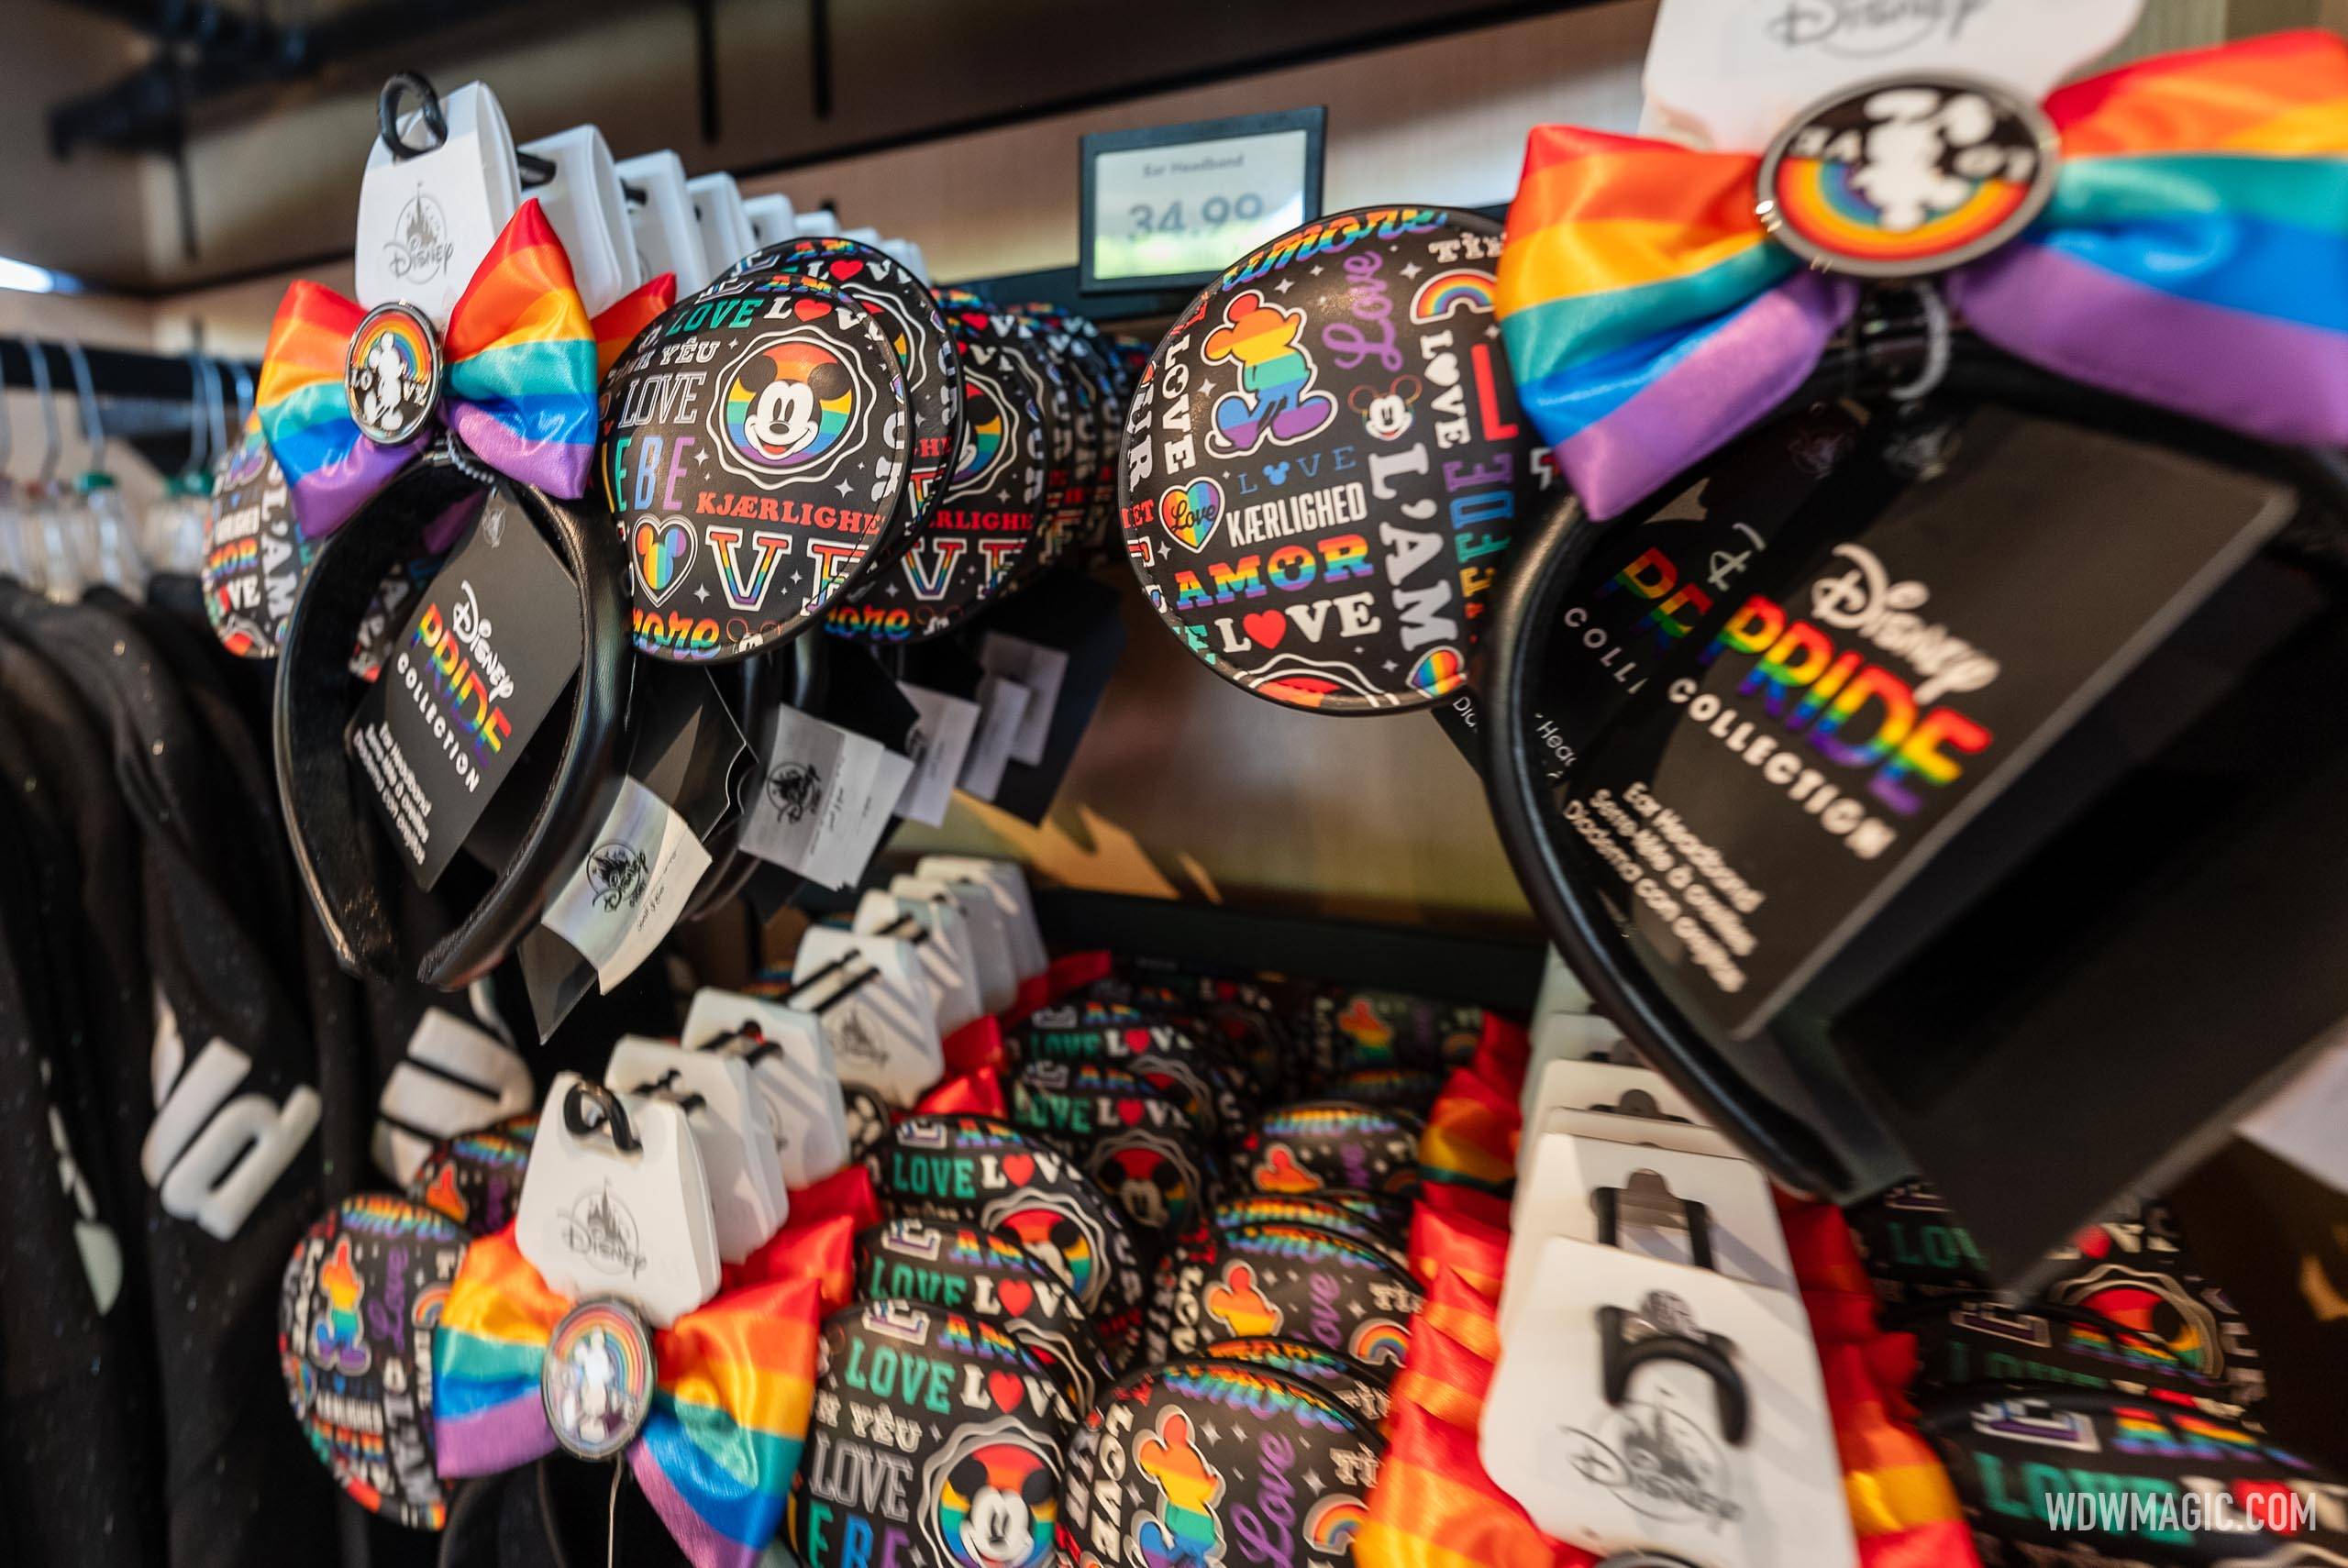 2024 Disney Pride Collection at EPCOT's Creations Shop